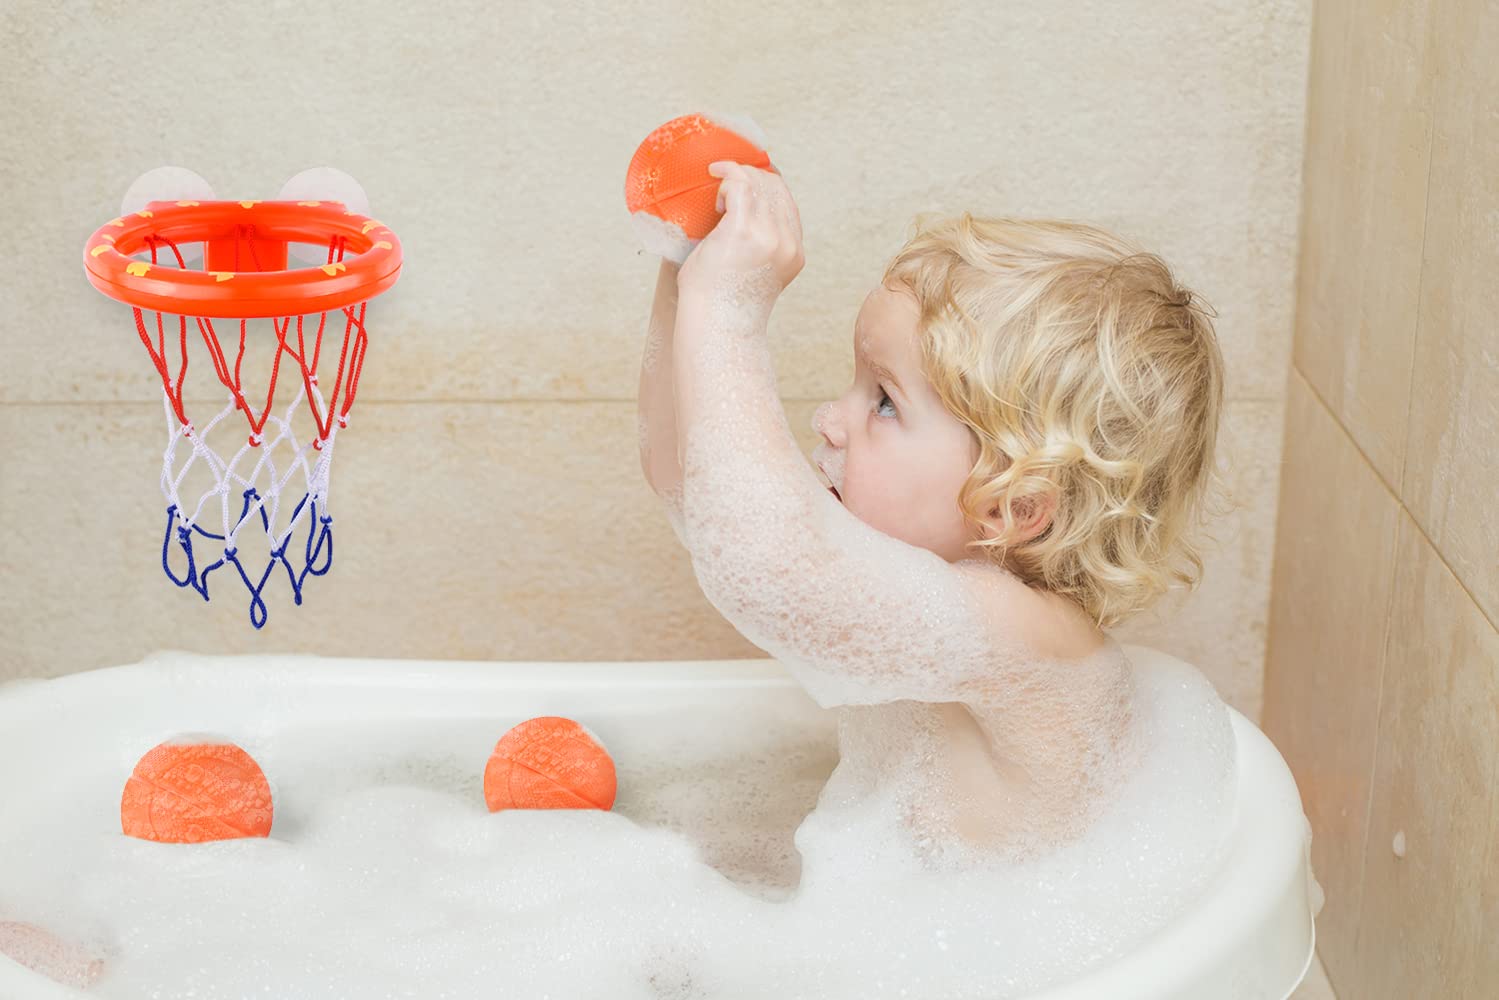 BRITENWAY Bath Toys - Bathtub Basketball Hoop for Kids w/ 3 Balls - BPA Free Plastic Toddler Bath Toys for Boys & Girls - Easy to Set Up Basketball Shooting Game w/Suctions Cups for Flat Surface